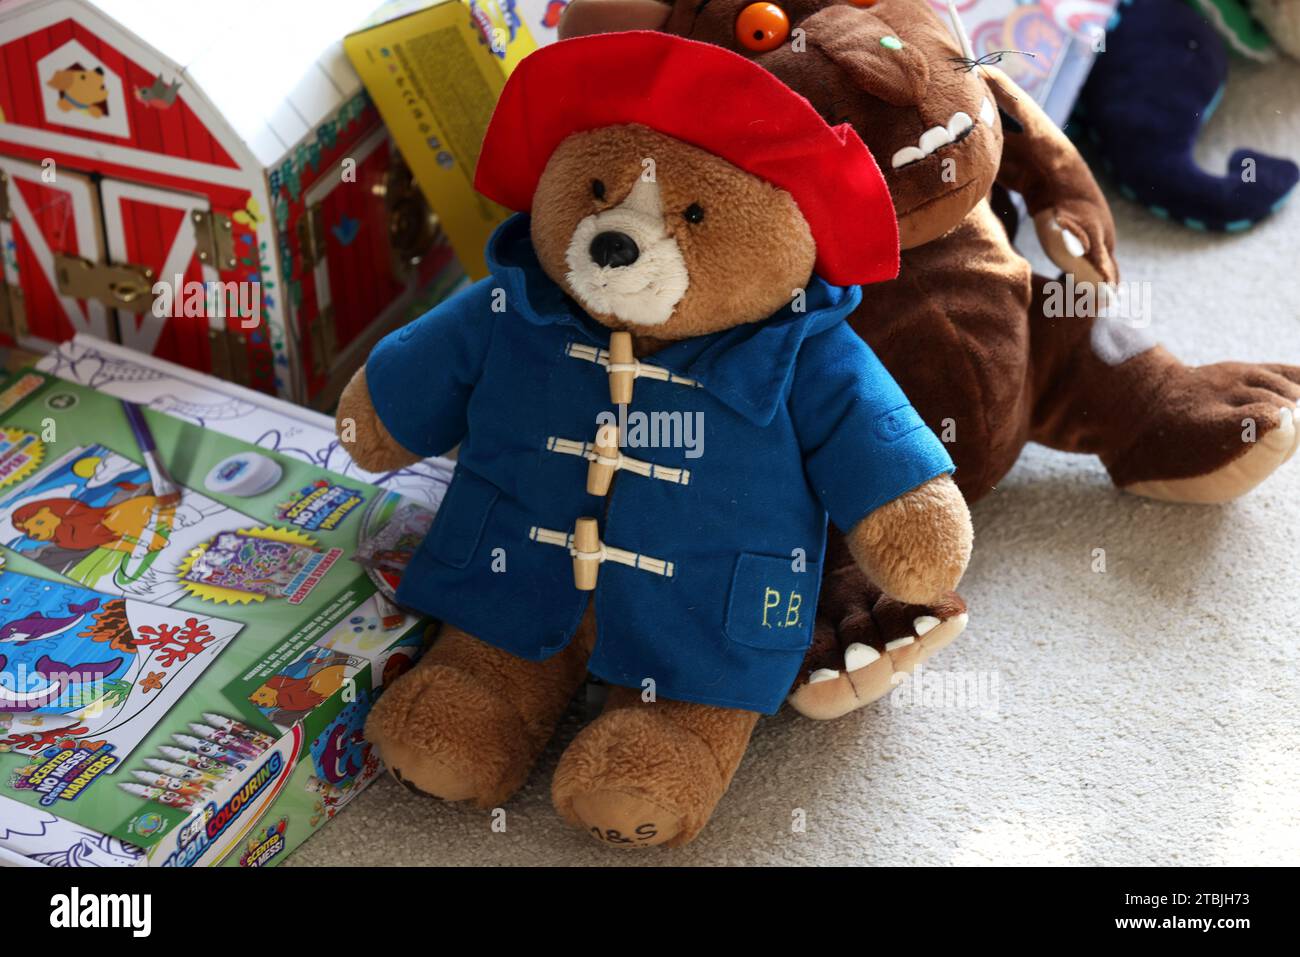 The Gruffalo and Paddington Bear teddy bears pictured in a child's bedroom in Chichester, West Sussex, UK. Stock Photo